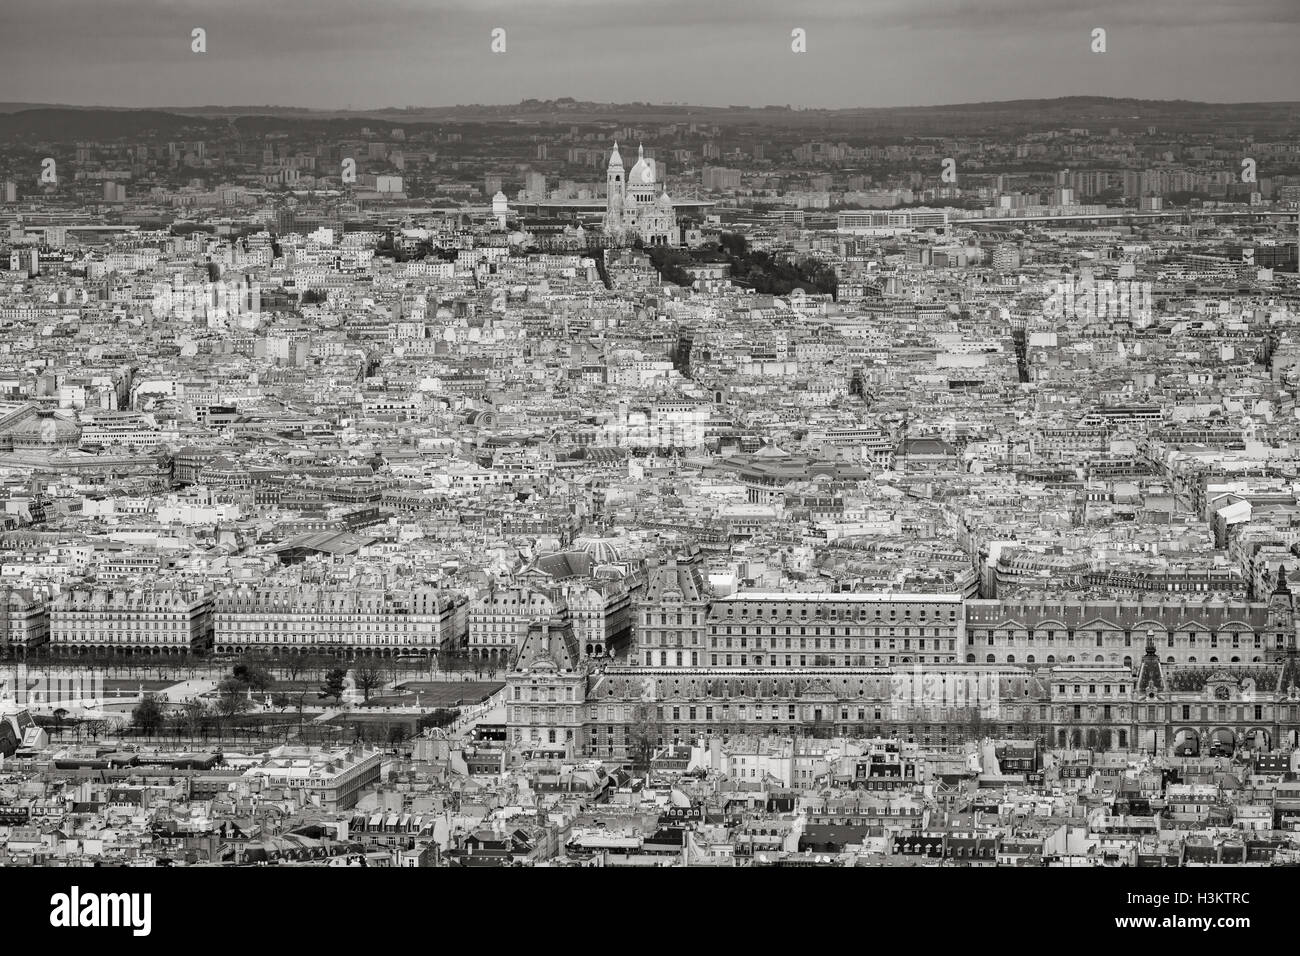 Aerial view of Paris rooftops with The Louvre, Tuileries Garden and Sacre Coeur Basilica in Montmartre. France (Black & White) Stock Photo